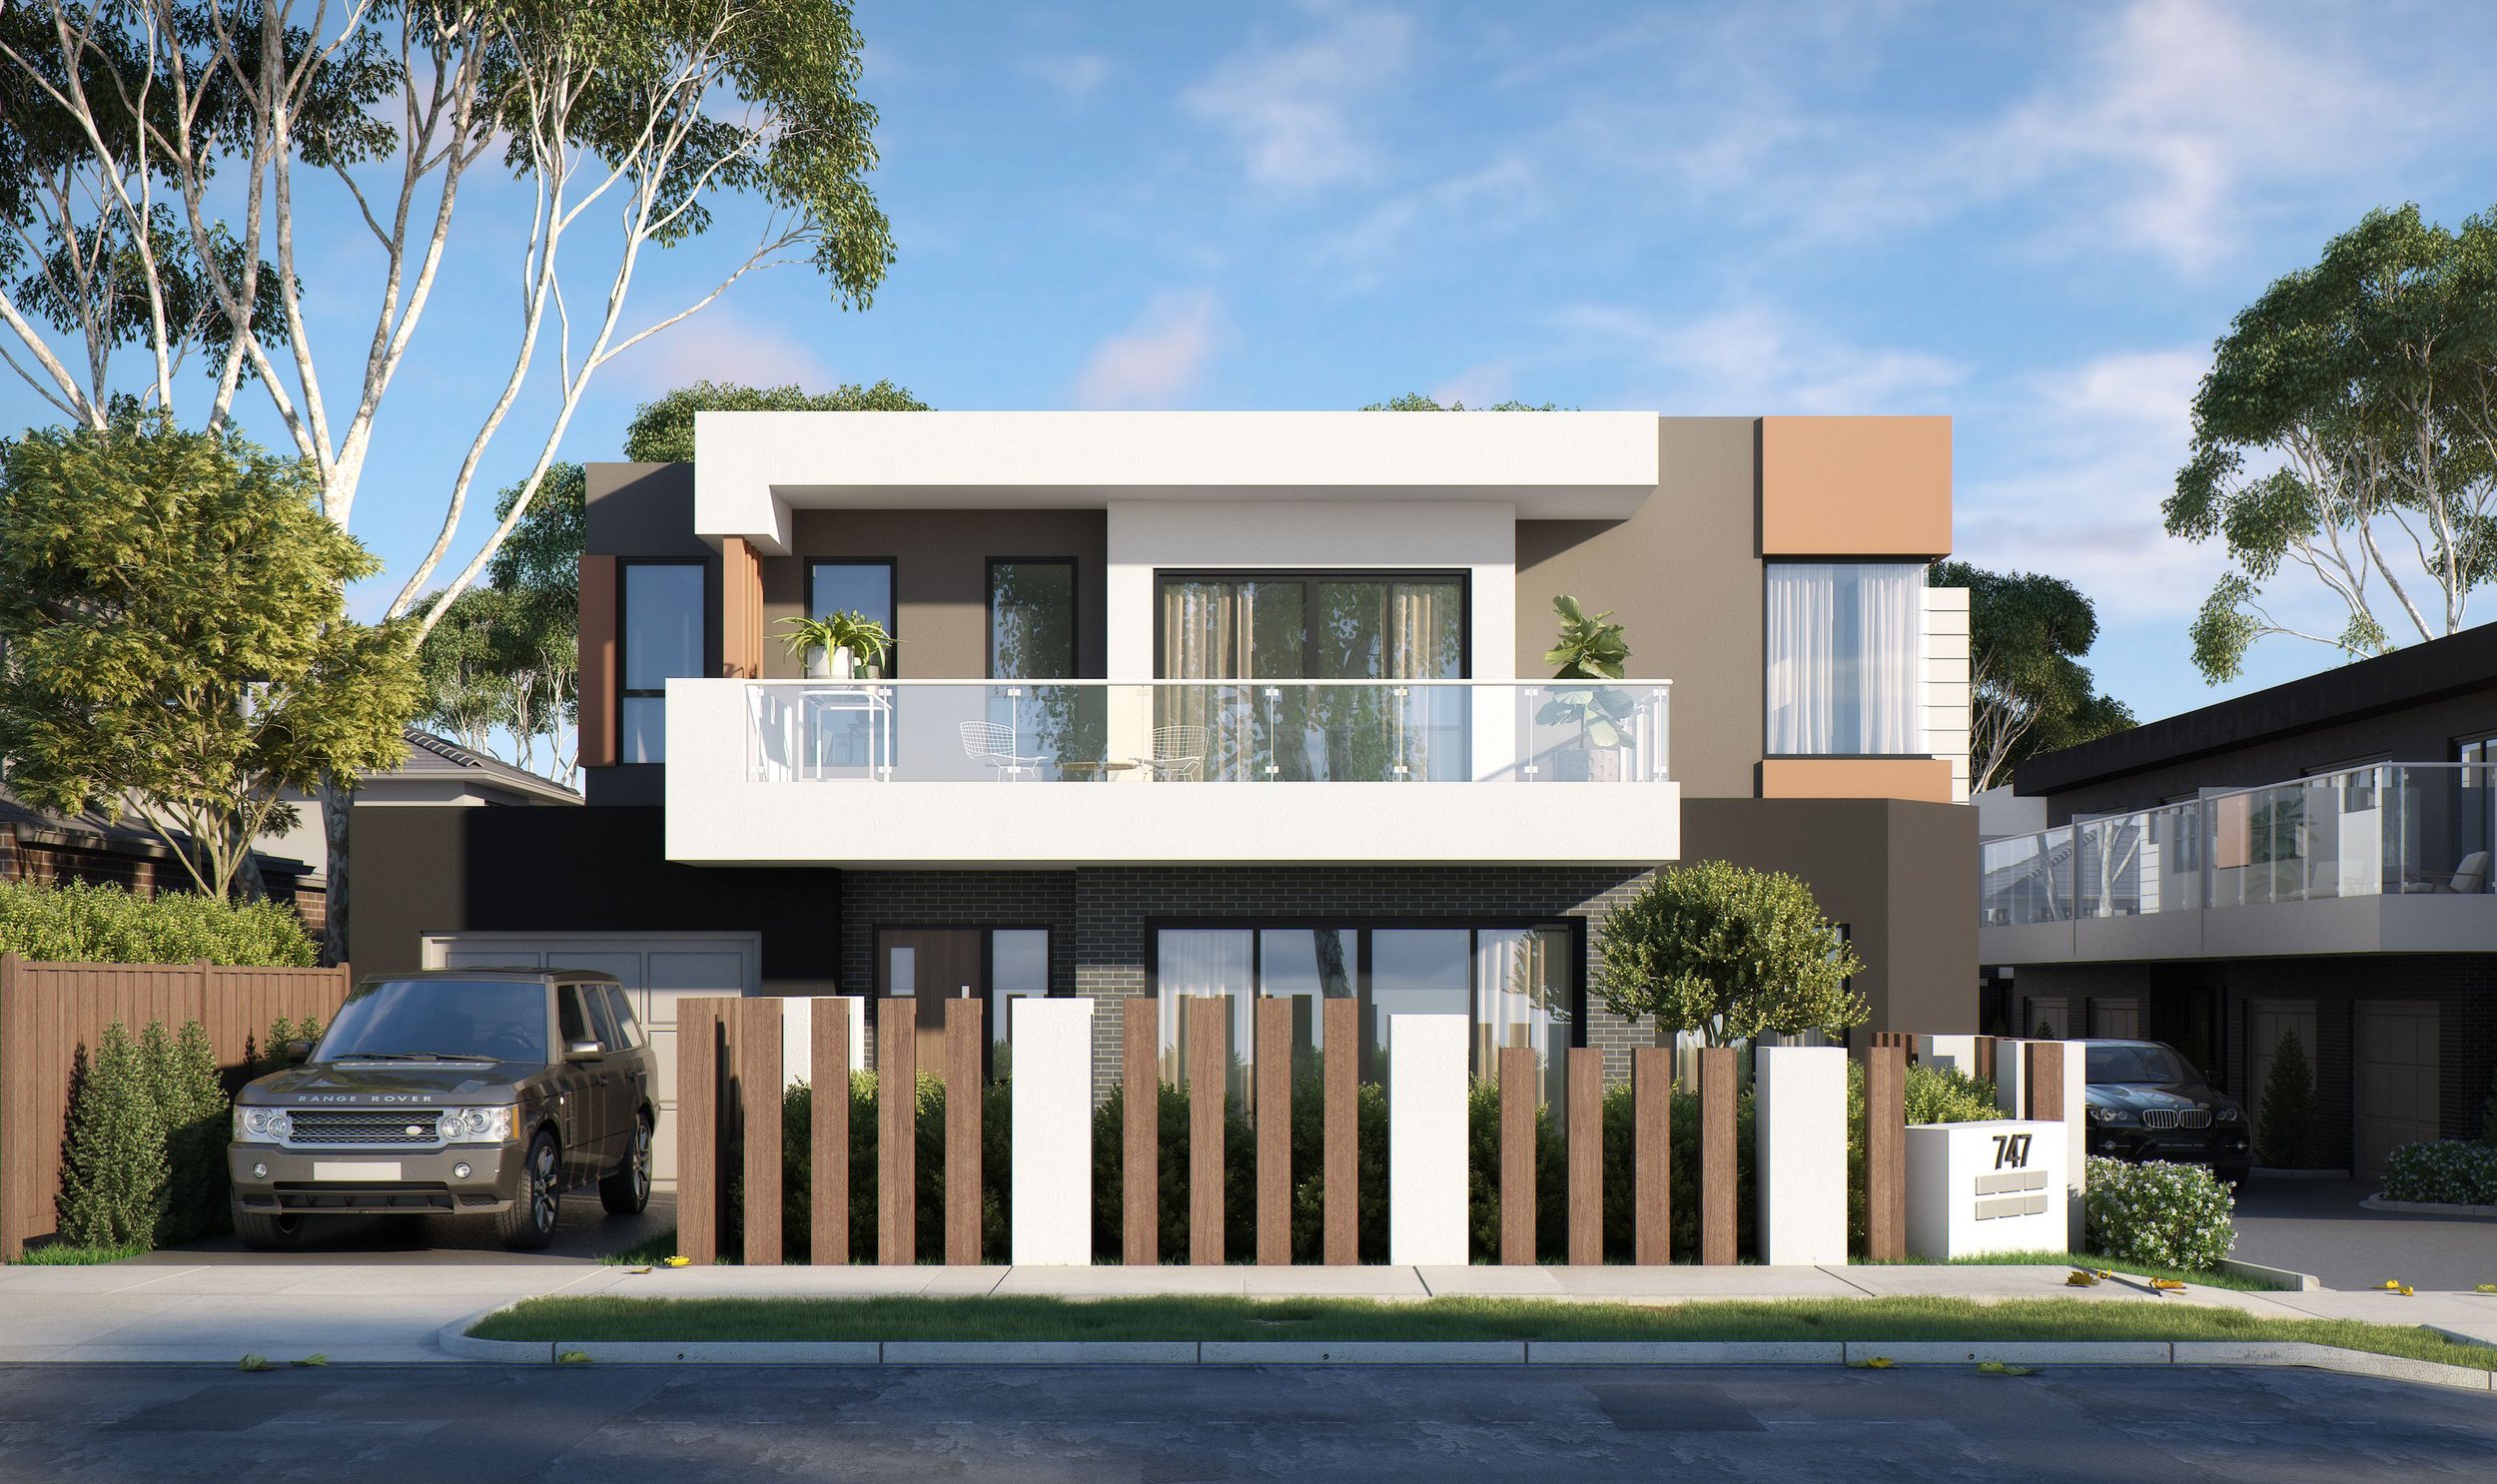 Scoresby - 747-749 Stud Road, Scoresby, VIC 3179 - Townly - 6.jpg